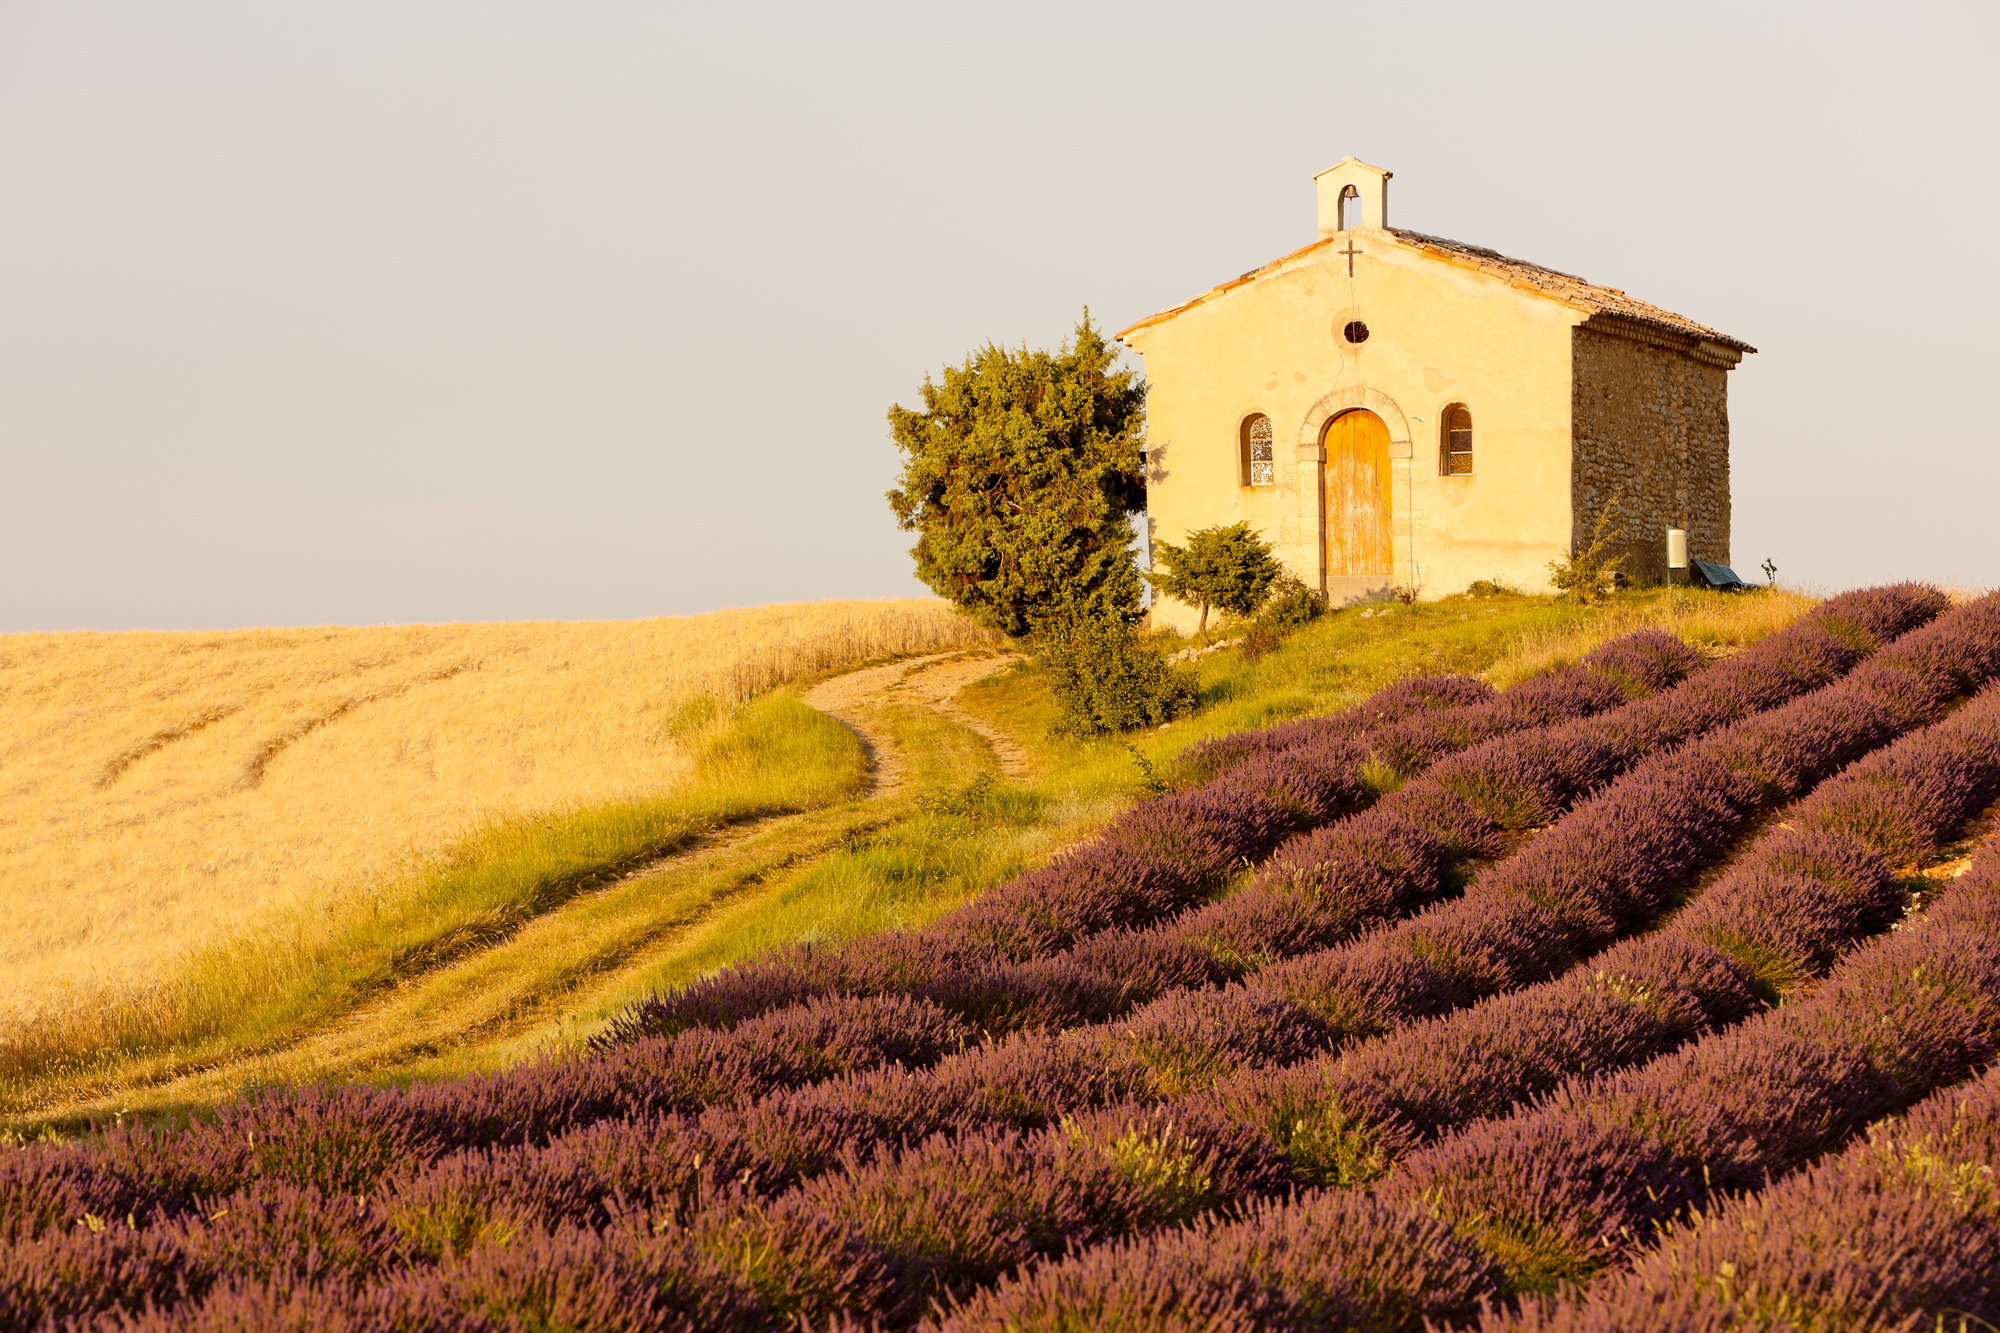 A small brick church sits on top of a hill with a rows of wheat on the hill to the left and rows of lavendar on the right.